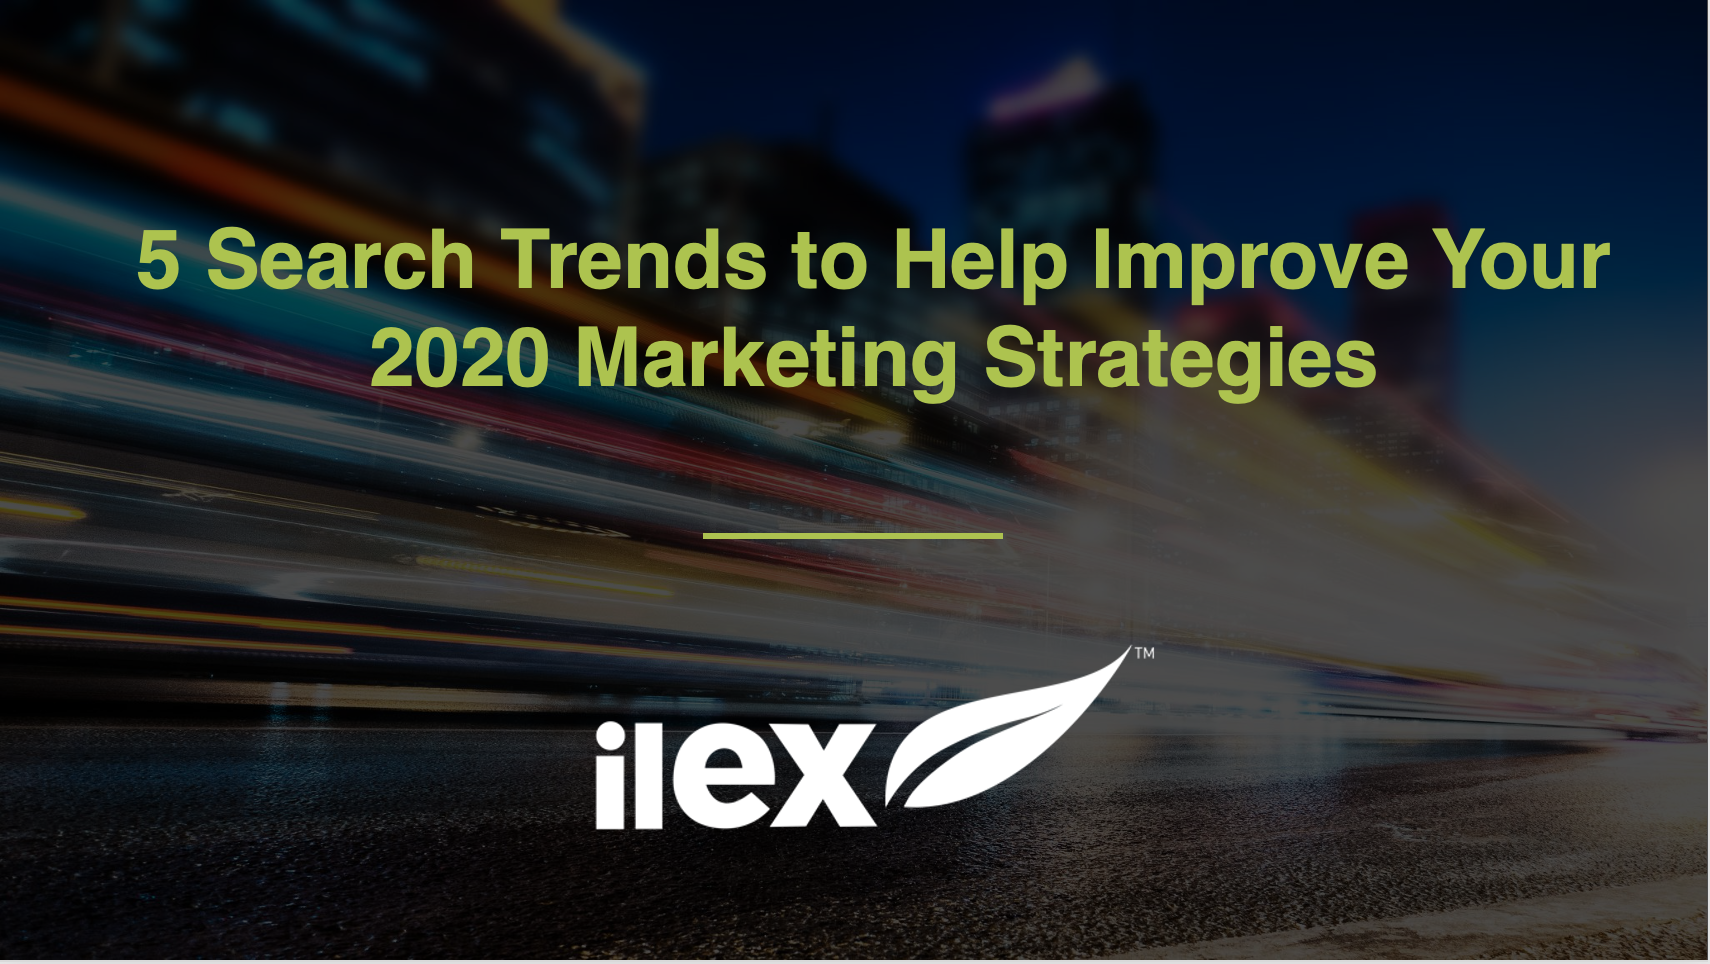 5 Search Trends to Help Improve Your 2020 Marketing Strategies